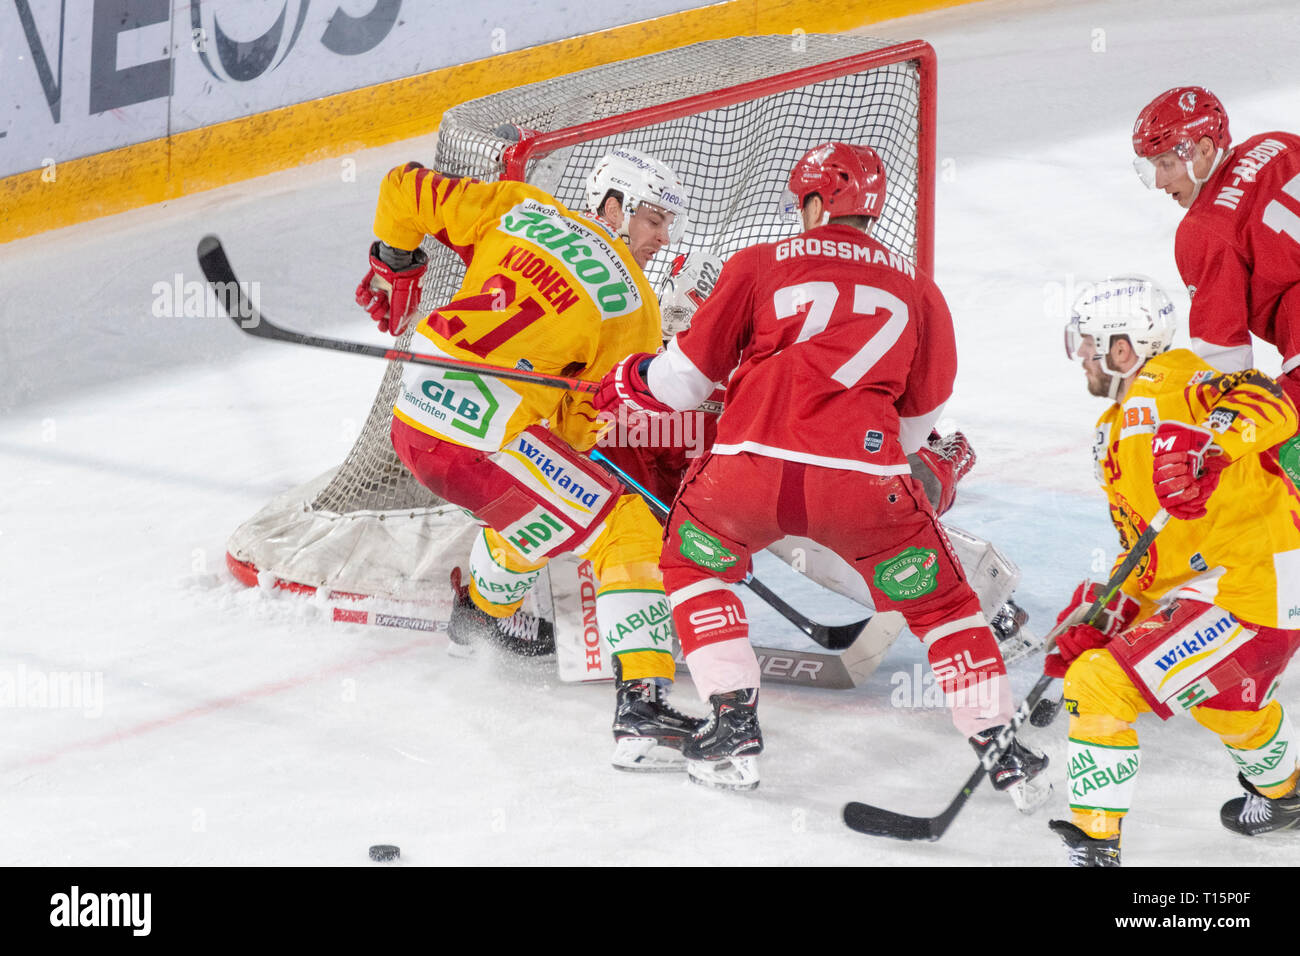 Lausanne, Switzerland. 23th march, 2019. LNA SWISS ICE HOCKEY LAUSANNE HC VS SCL TIGERS- Lausanne Hc Vs HC SCL Tigers at Vaudoise Arena, Lausanne (Play-offs,  Quarter Finals Act VII, 23-03-2019. Credit: Eric Dubost/Alamy Live News Stock Photo